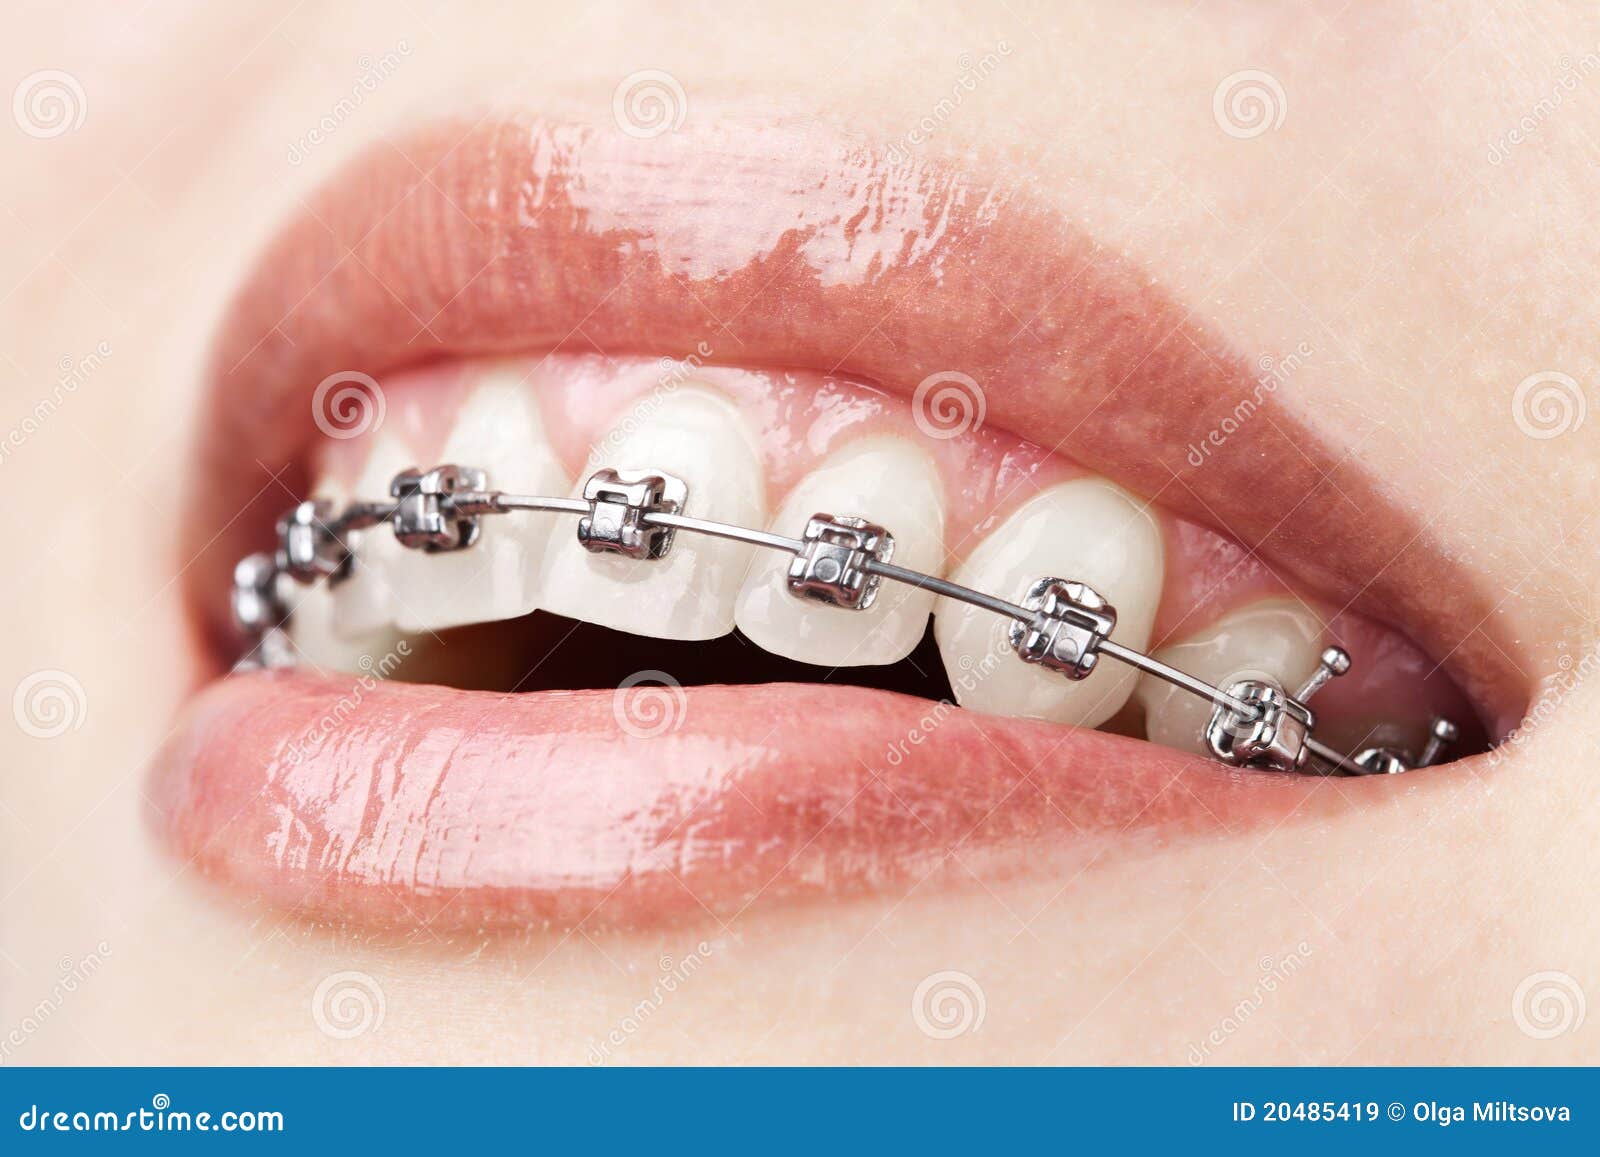 Teeth With Braces Royalty Free Stock Images - Image: 20485419